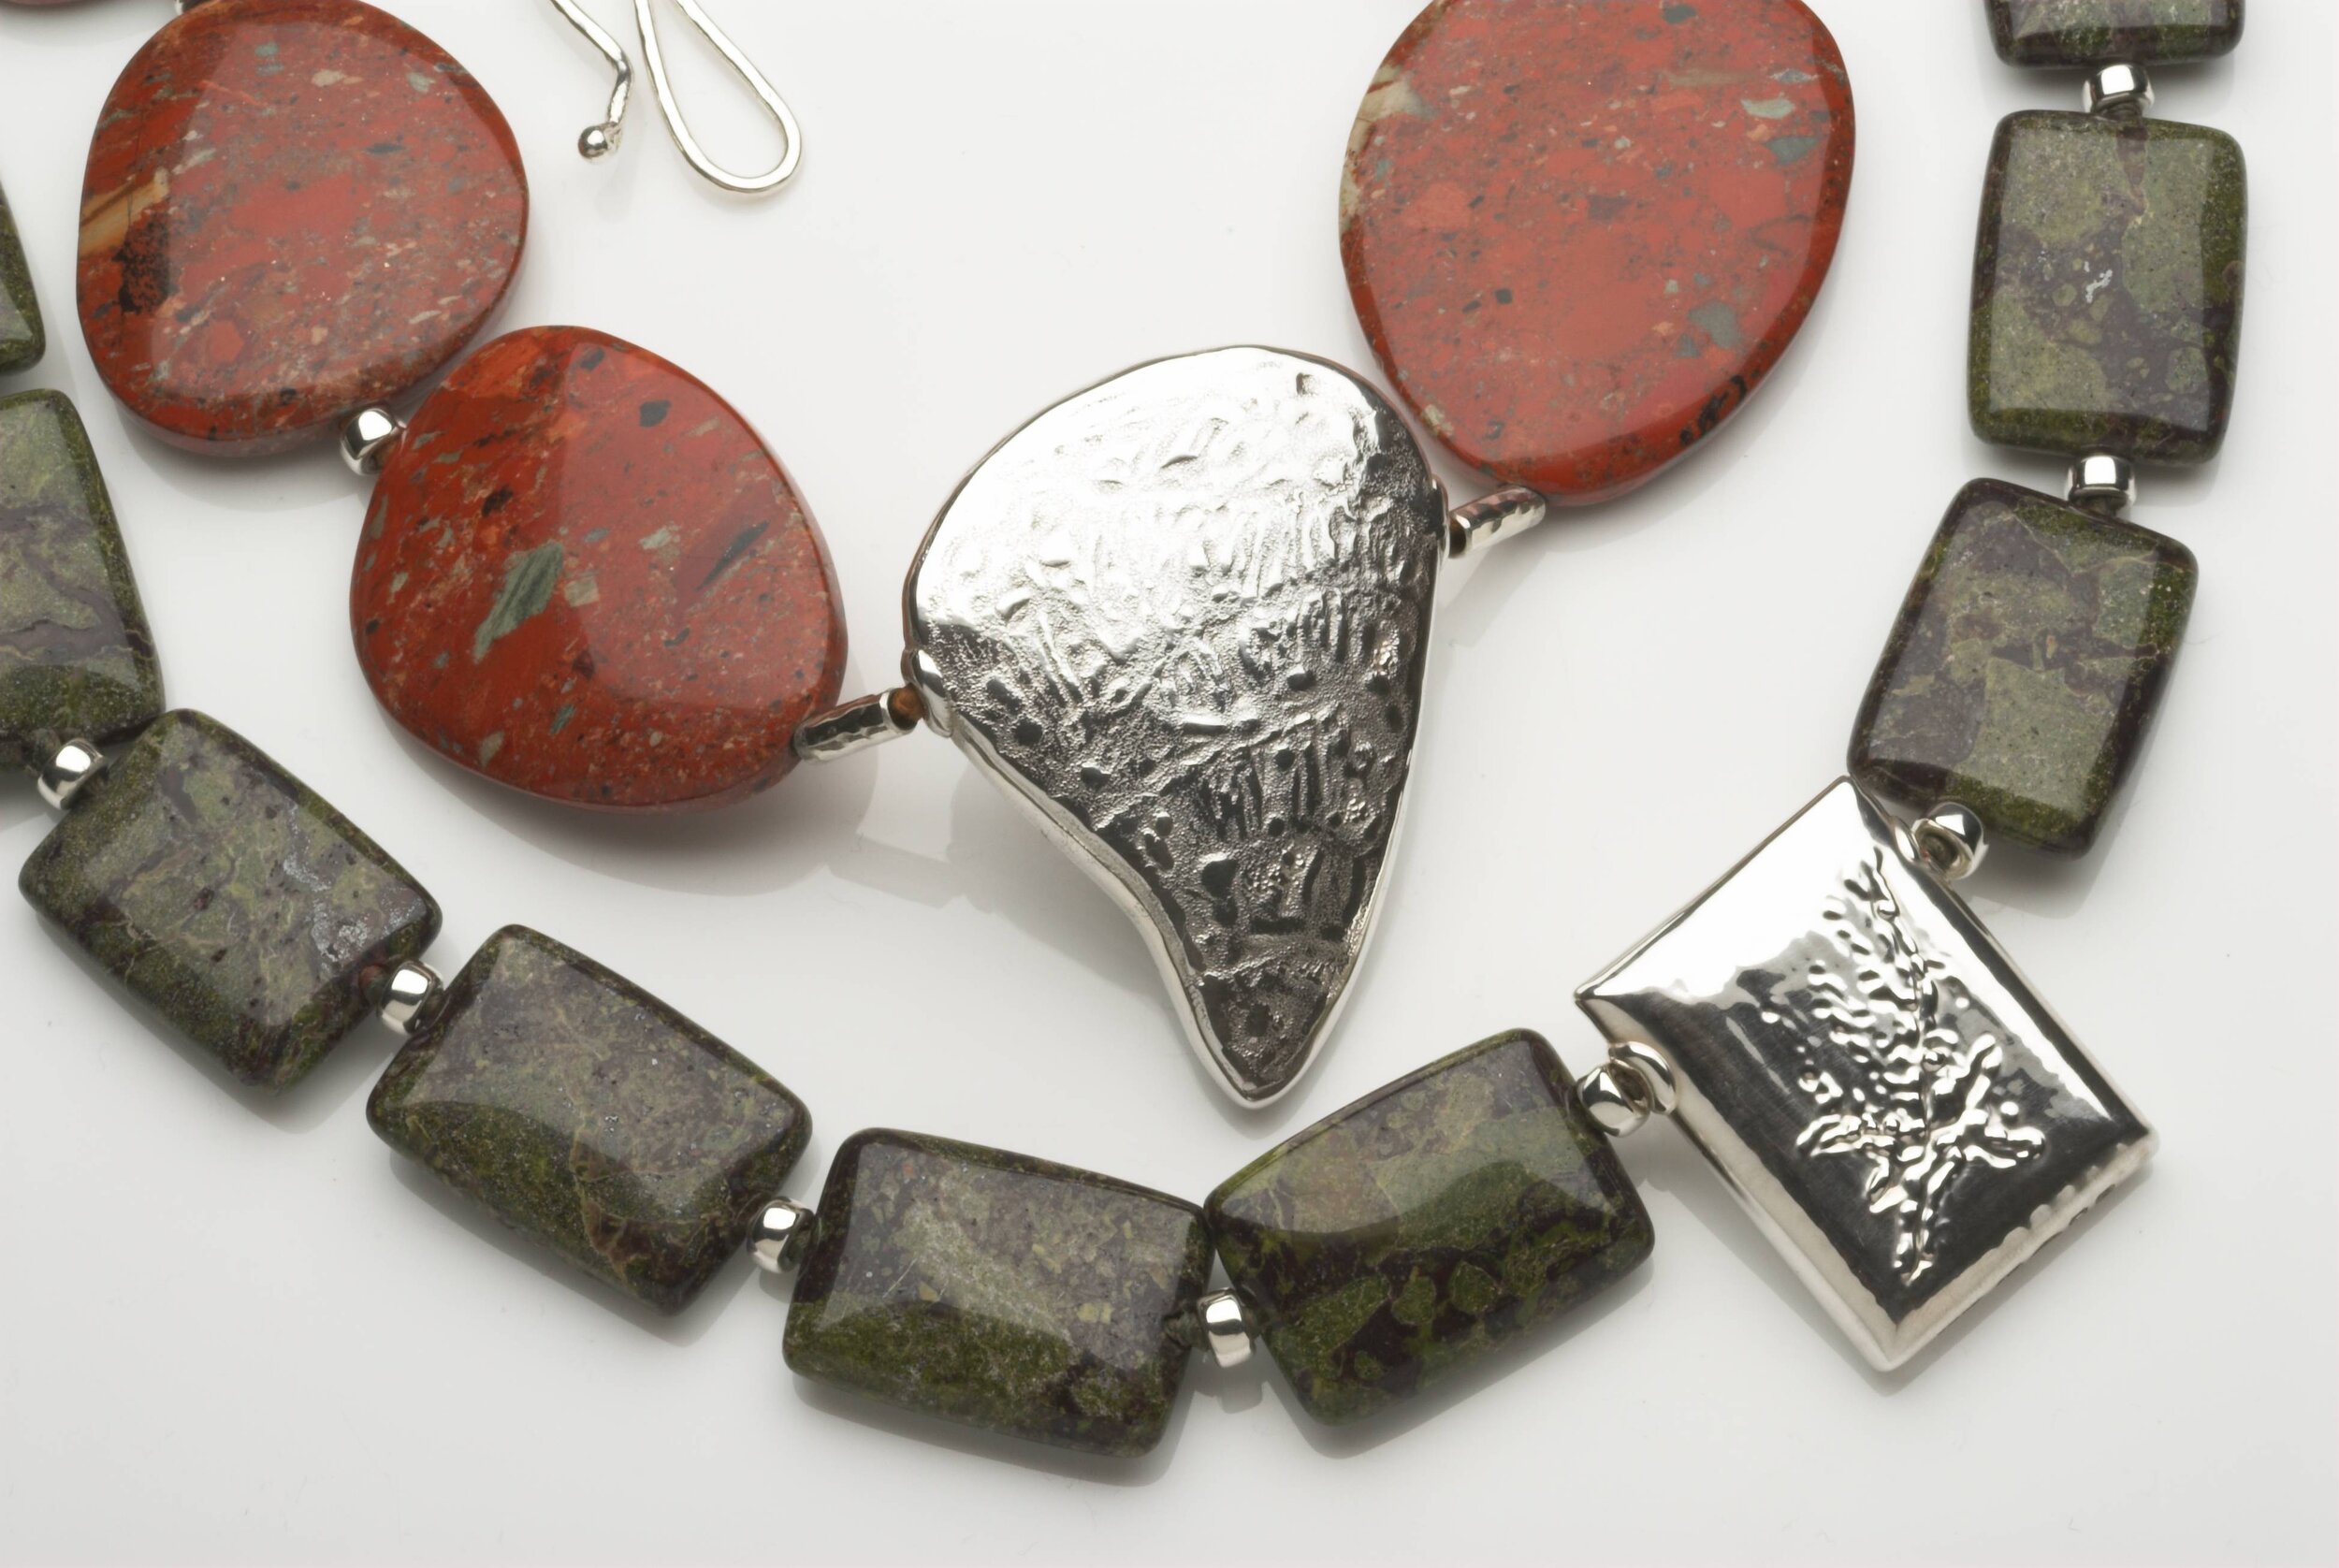 Australian Jasper and Moss Jasper Necklace with Hallmarked silver shapes £690 and £590.jpg